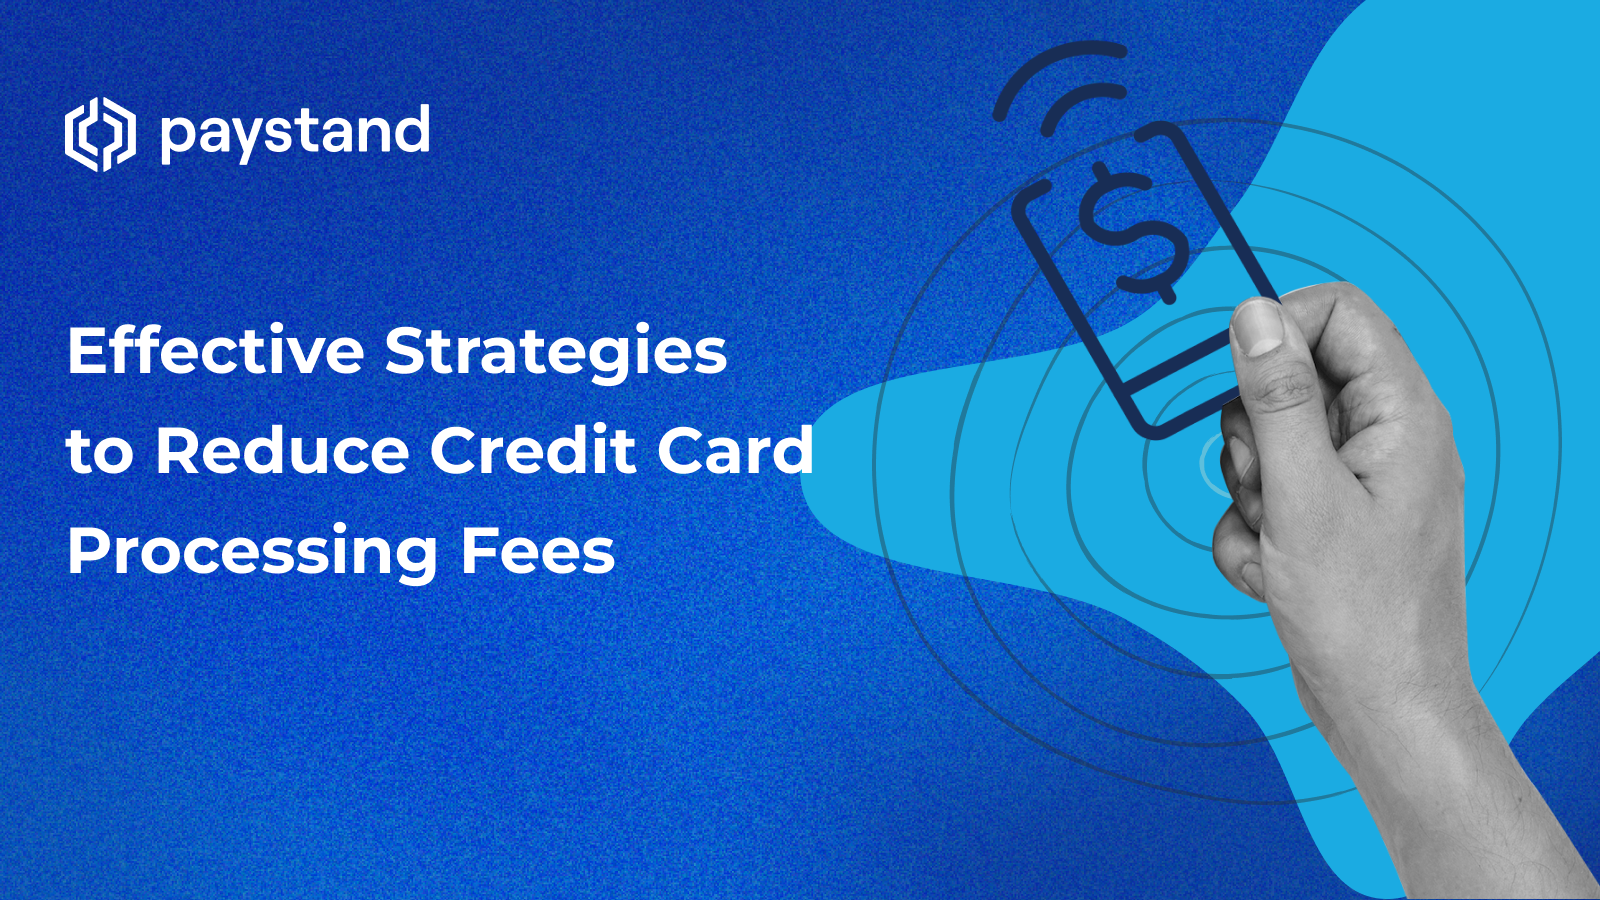 Effective Strategies to Reduce Credit Card Processing Fees